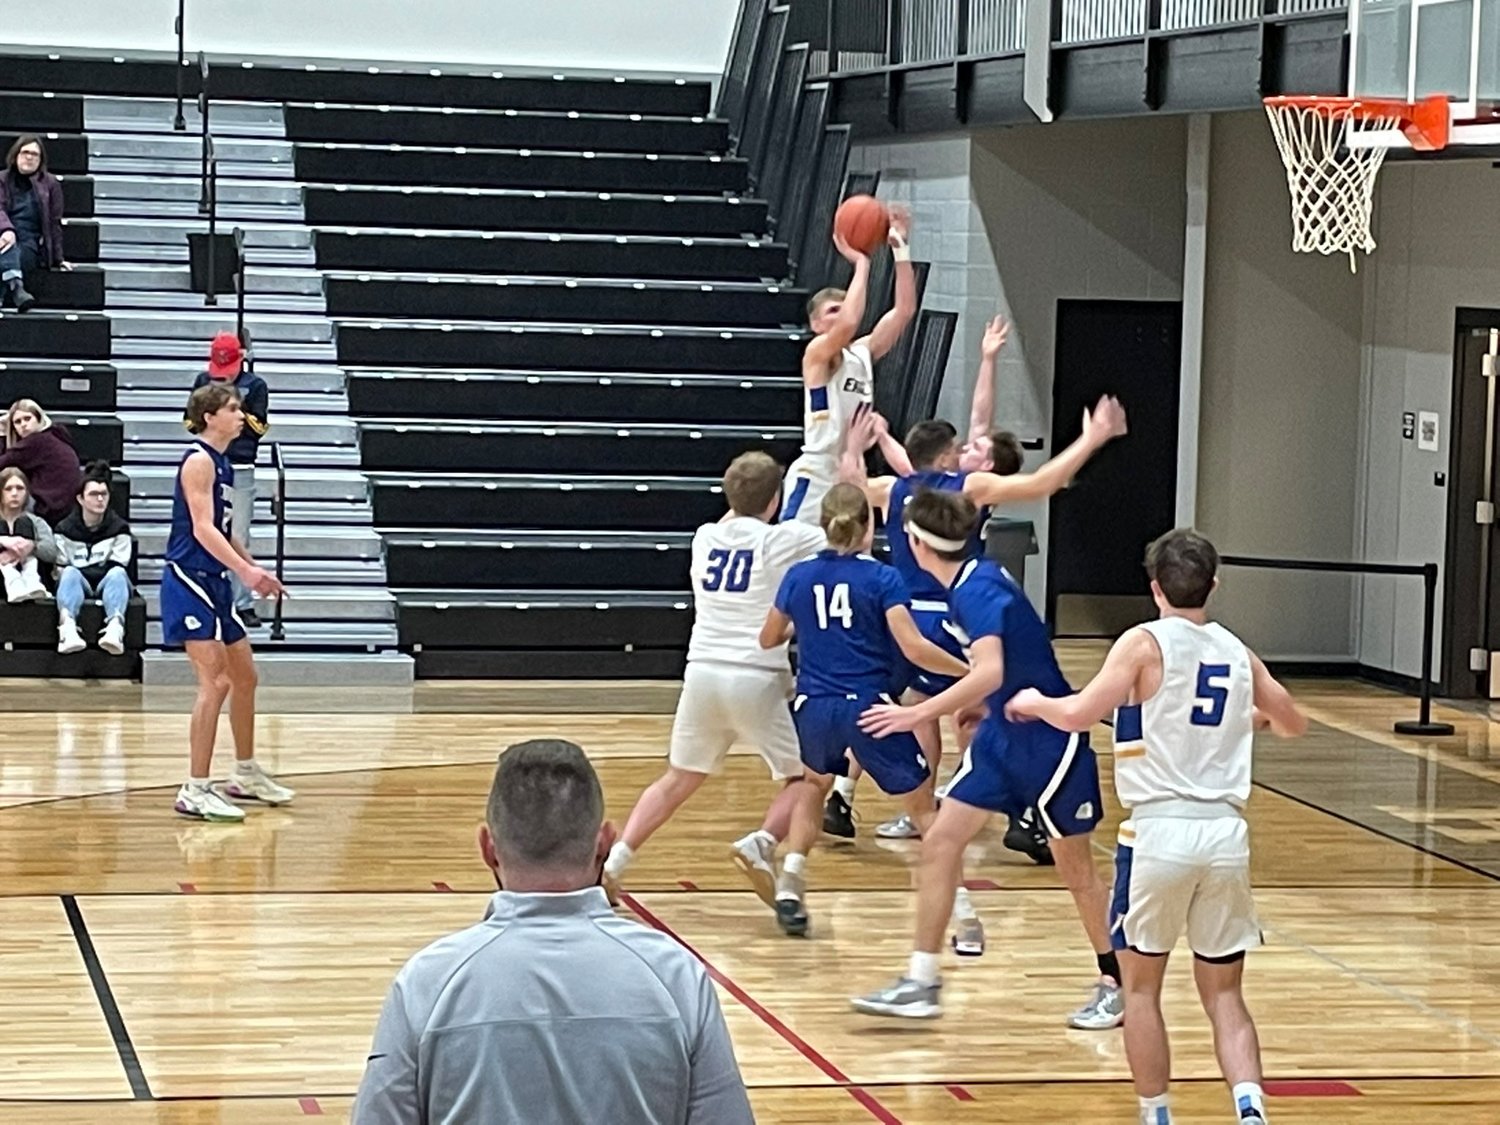 The Fordland Eagles have celebrated four straight wins, including a second place in the Huston tournament. Pictured is a 49-15 win over Cabool.